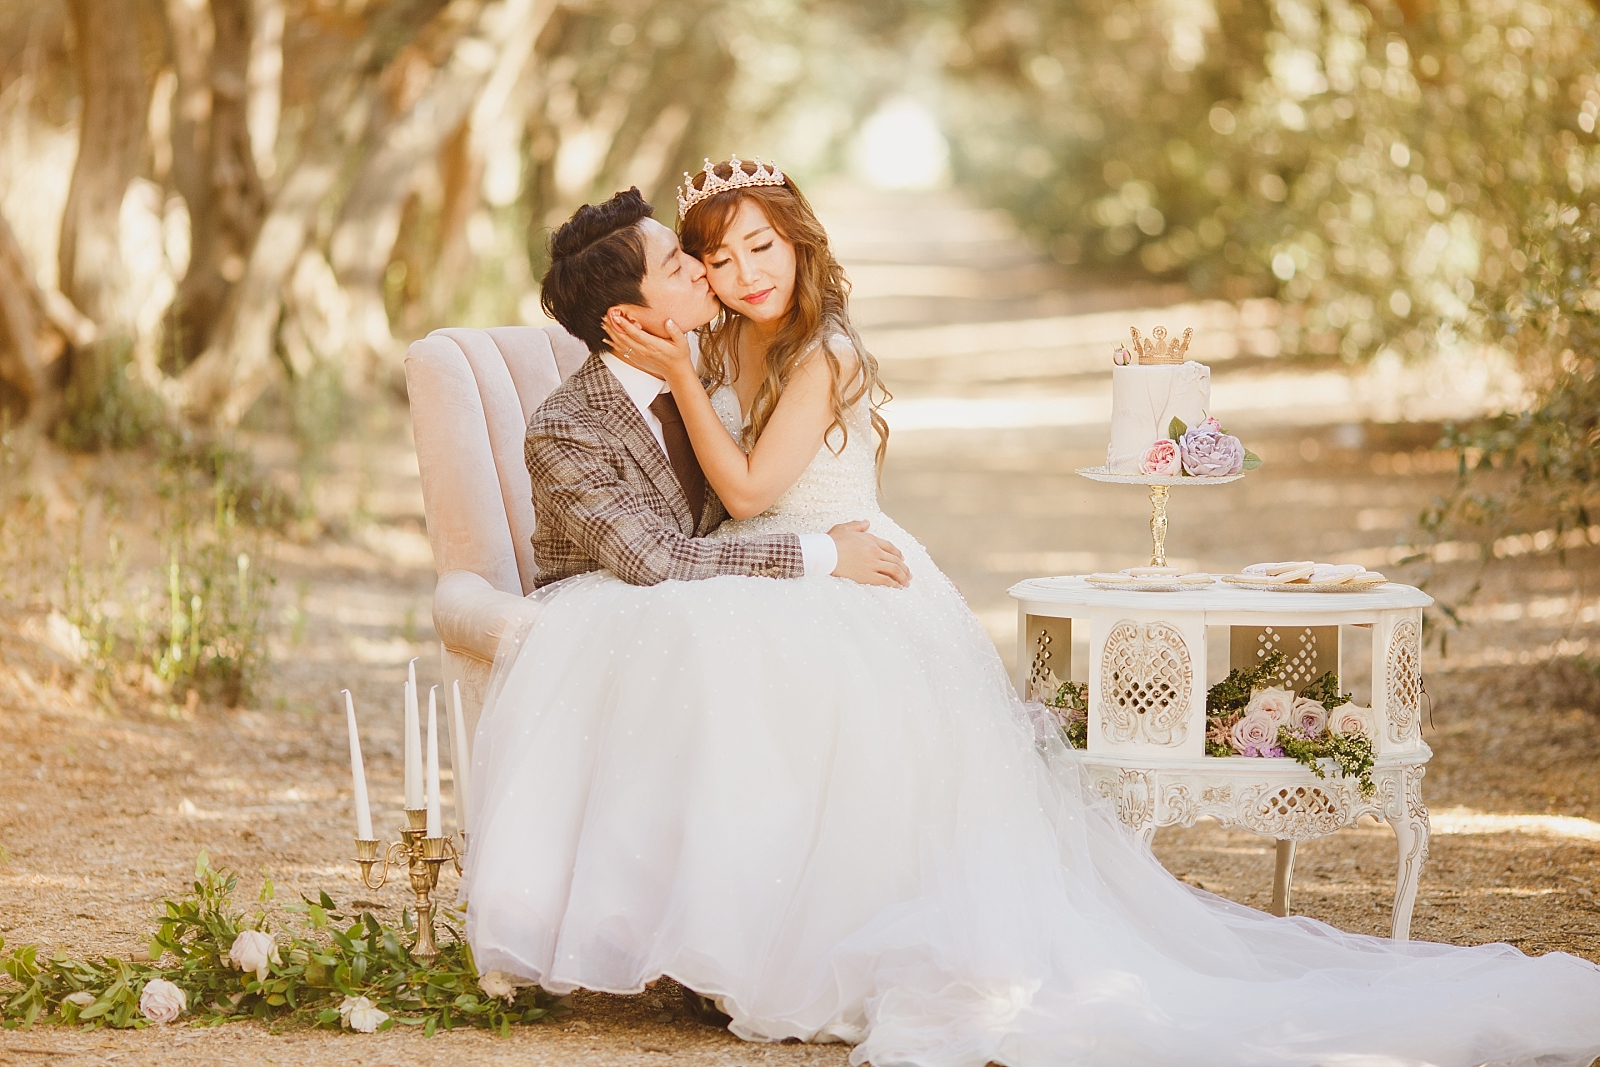 Fairytale wedding photos in the olive groves at Highland Springs Ranch